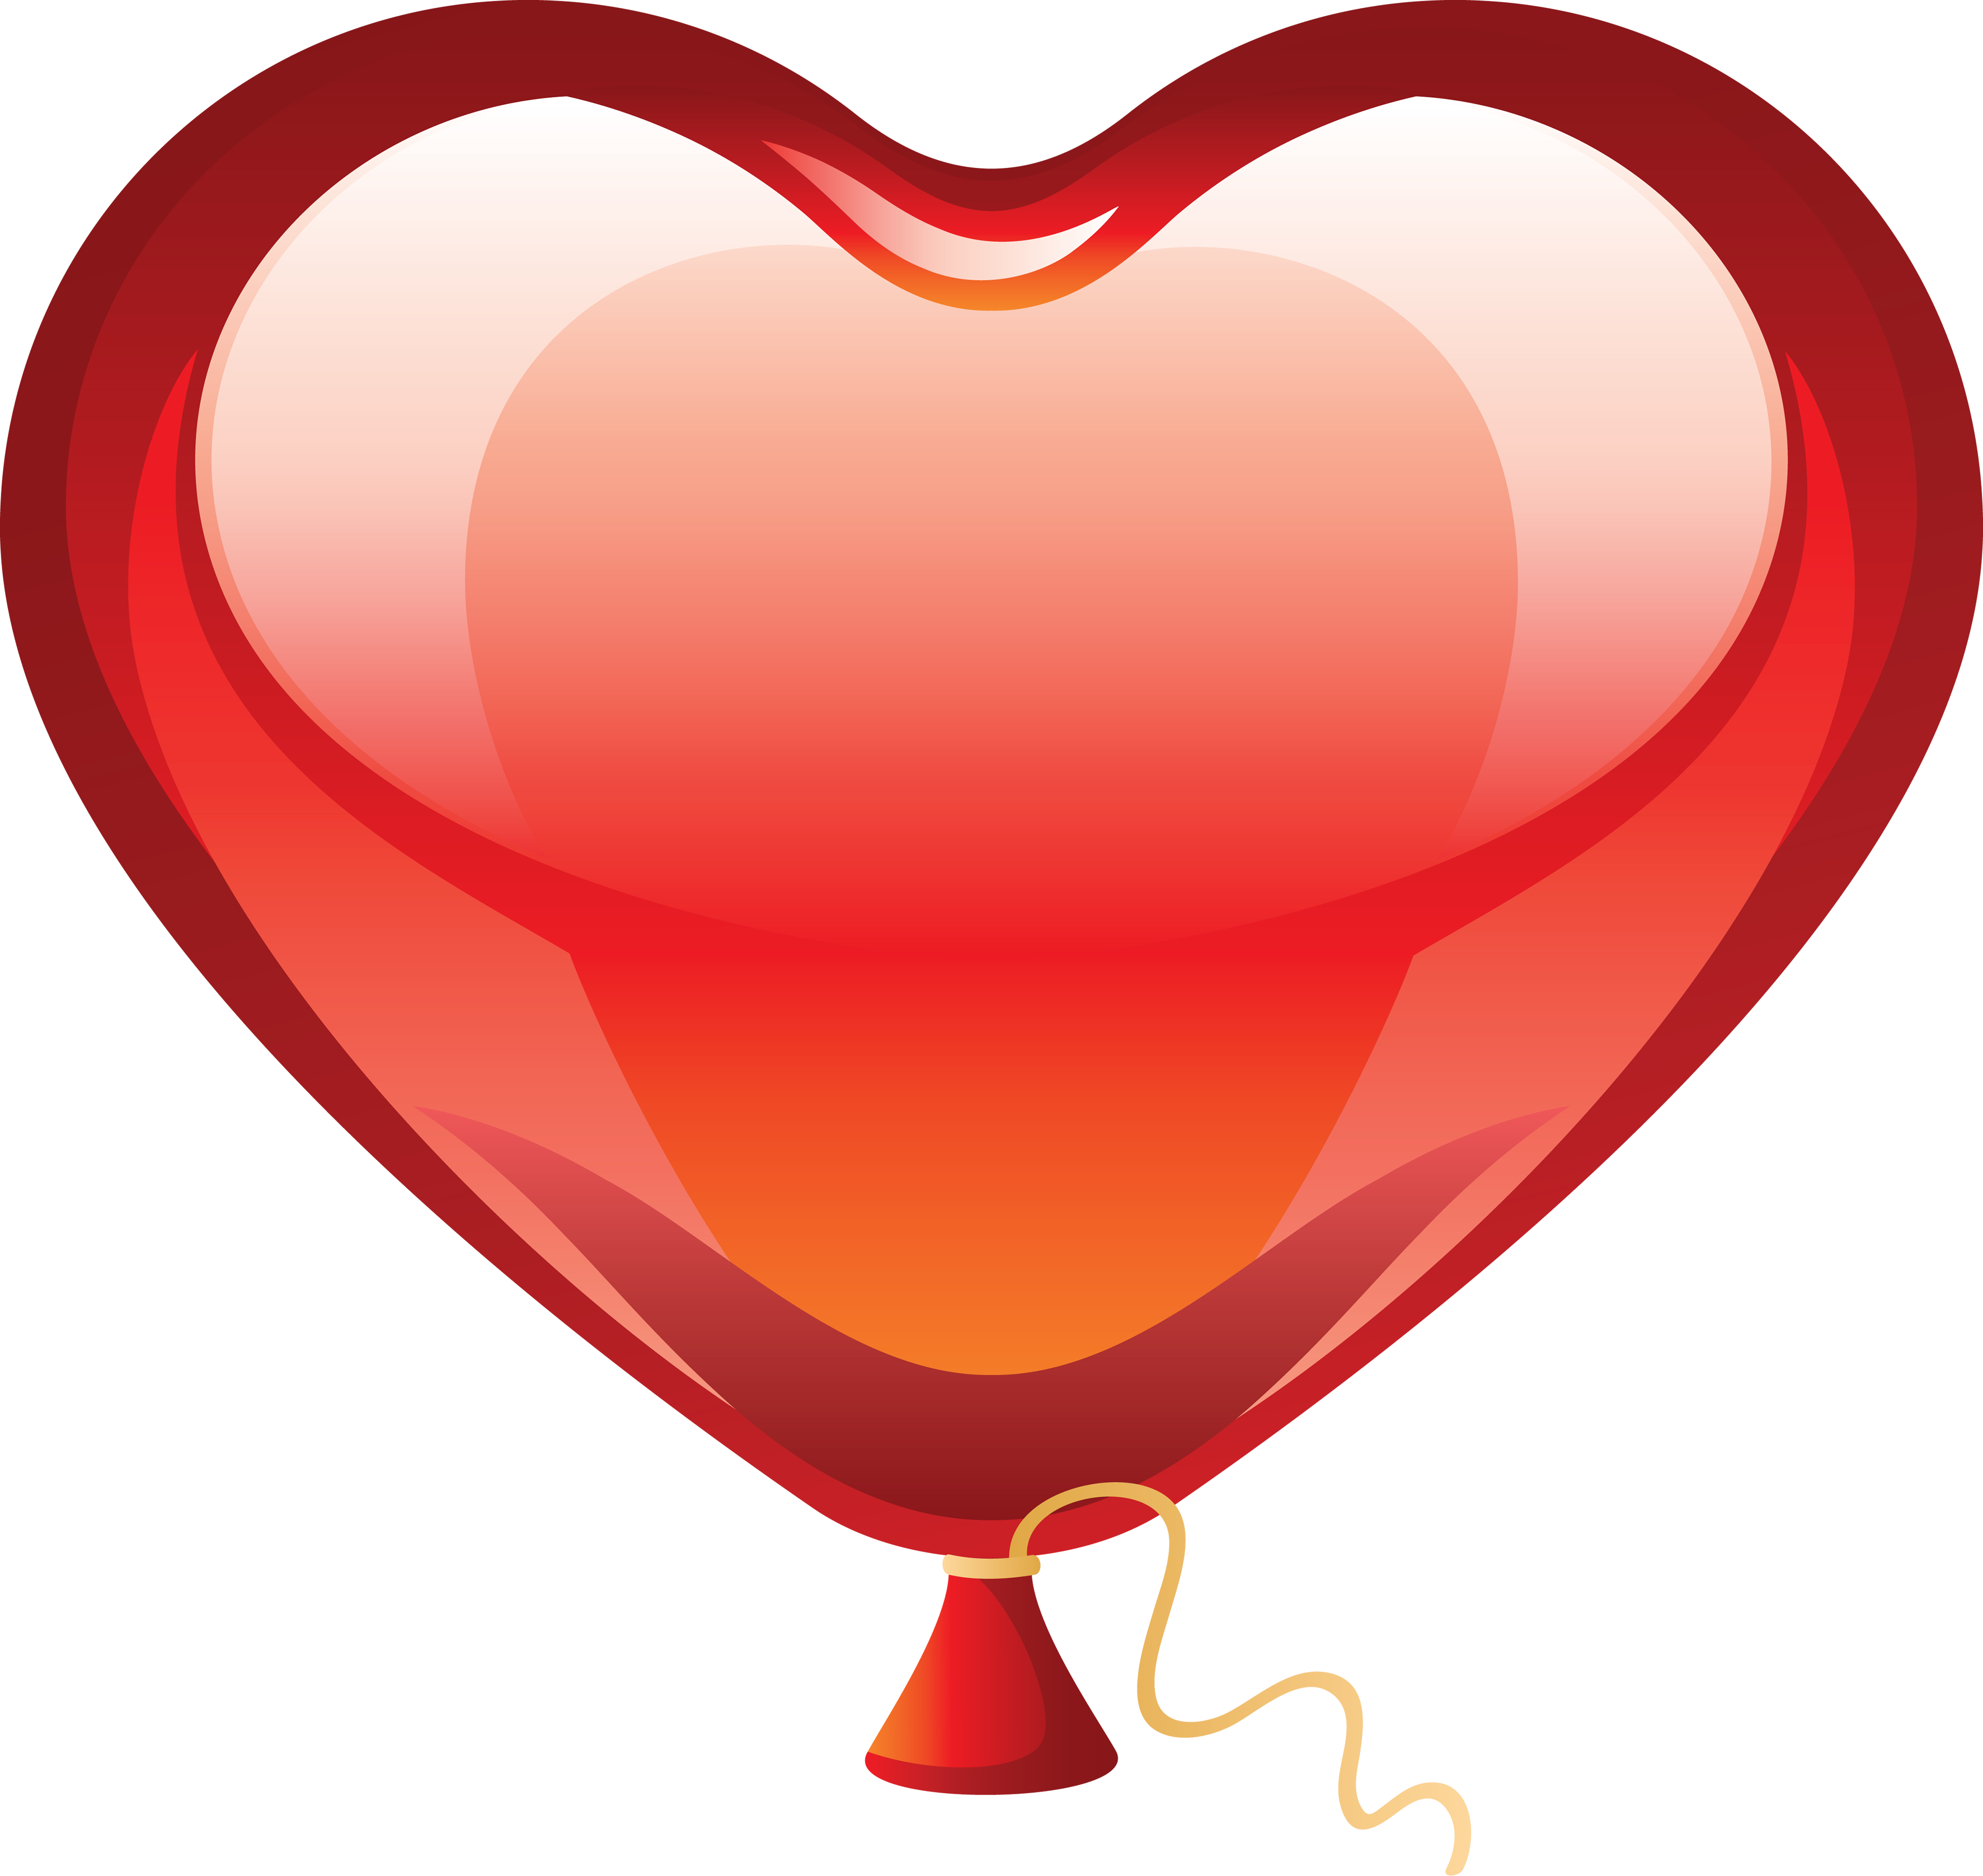 Download PNG image: Heart balloon PNG image, free download, heart 